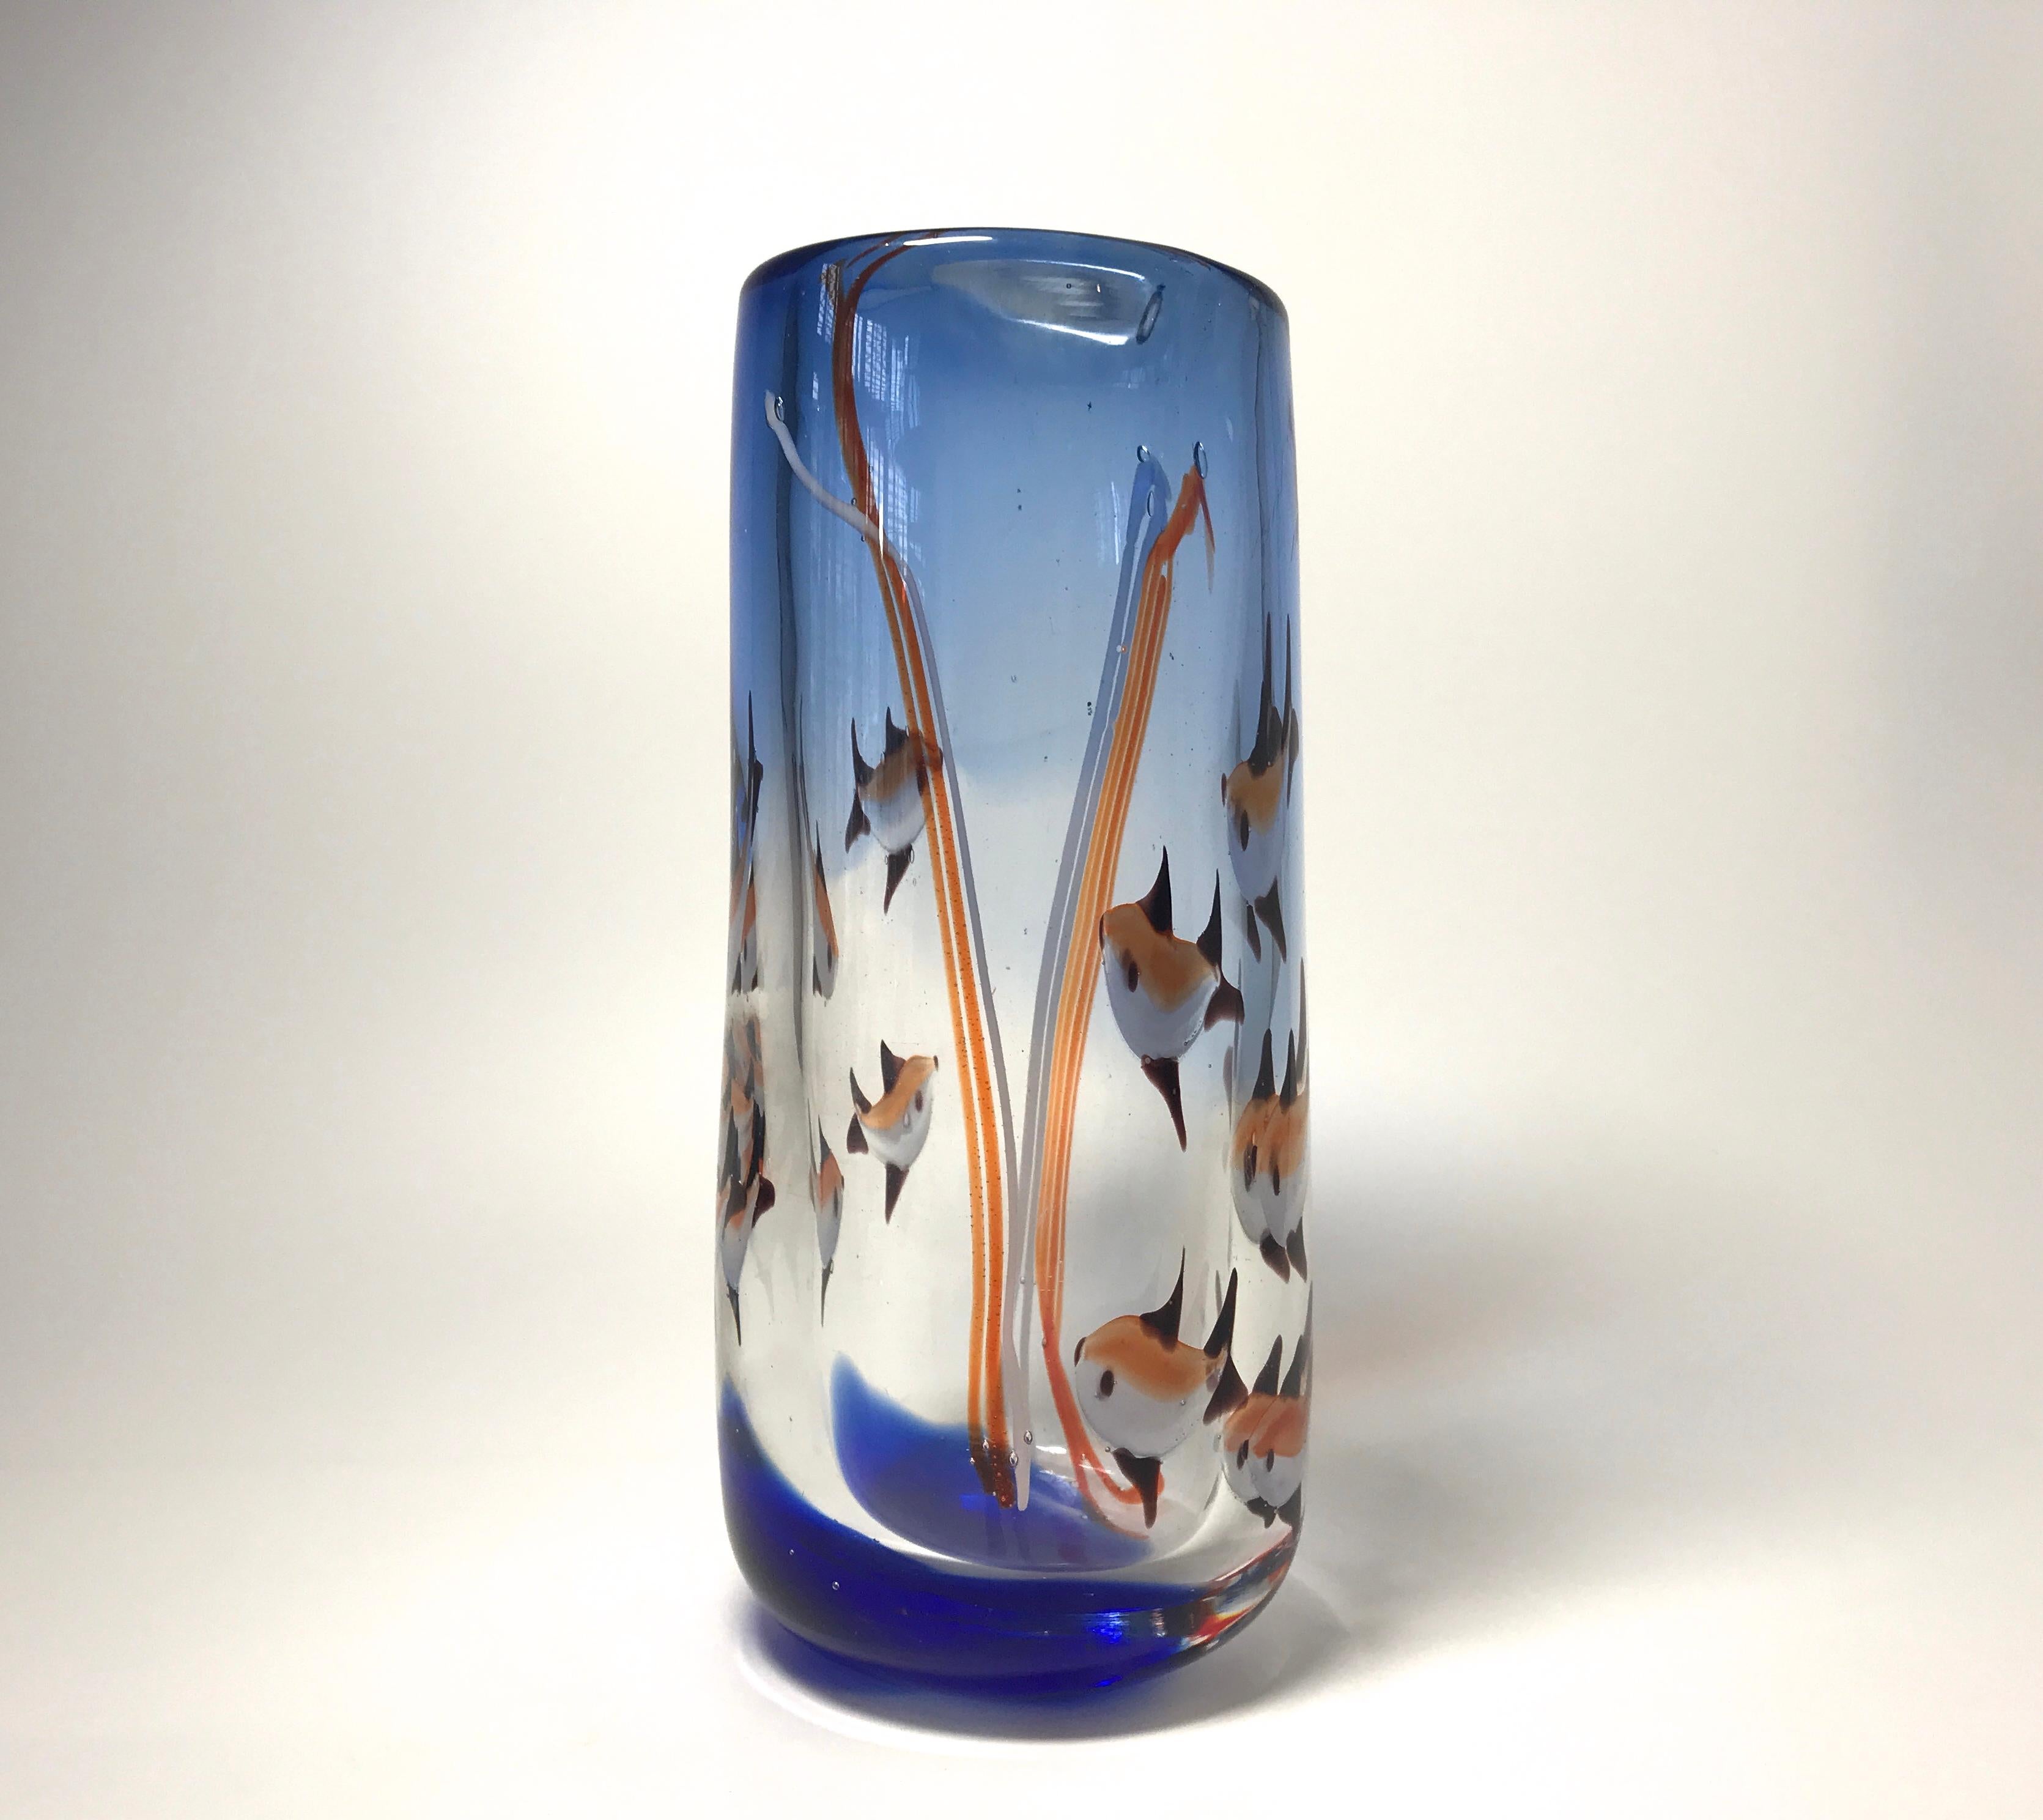 'Aquarium' tall heavyweight glass vase from Murano, Italy, created in the 1960s
Cobalt blue glass infused with fish, bubbles and reeds, a fun piece,
circa 1960
Measures: Height 8.5 inch, diameter 3.5 inch
In very good condition. Minor graze to